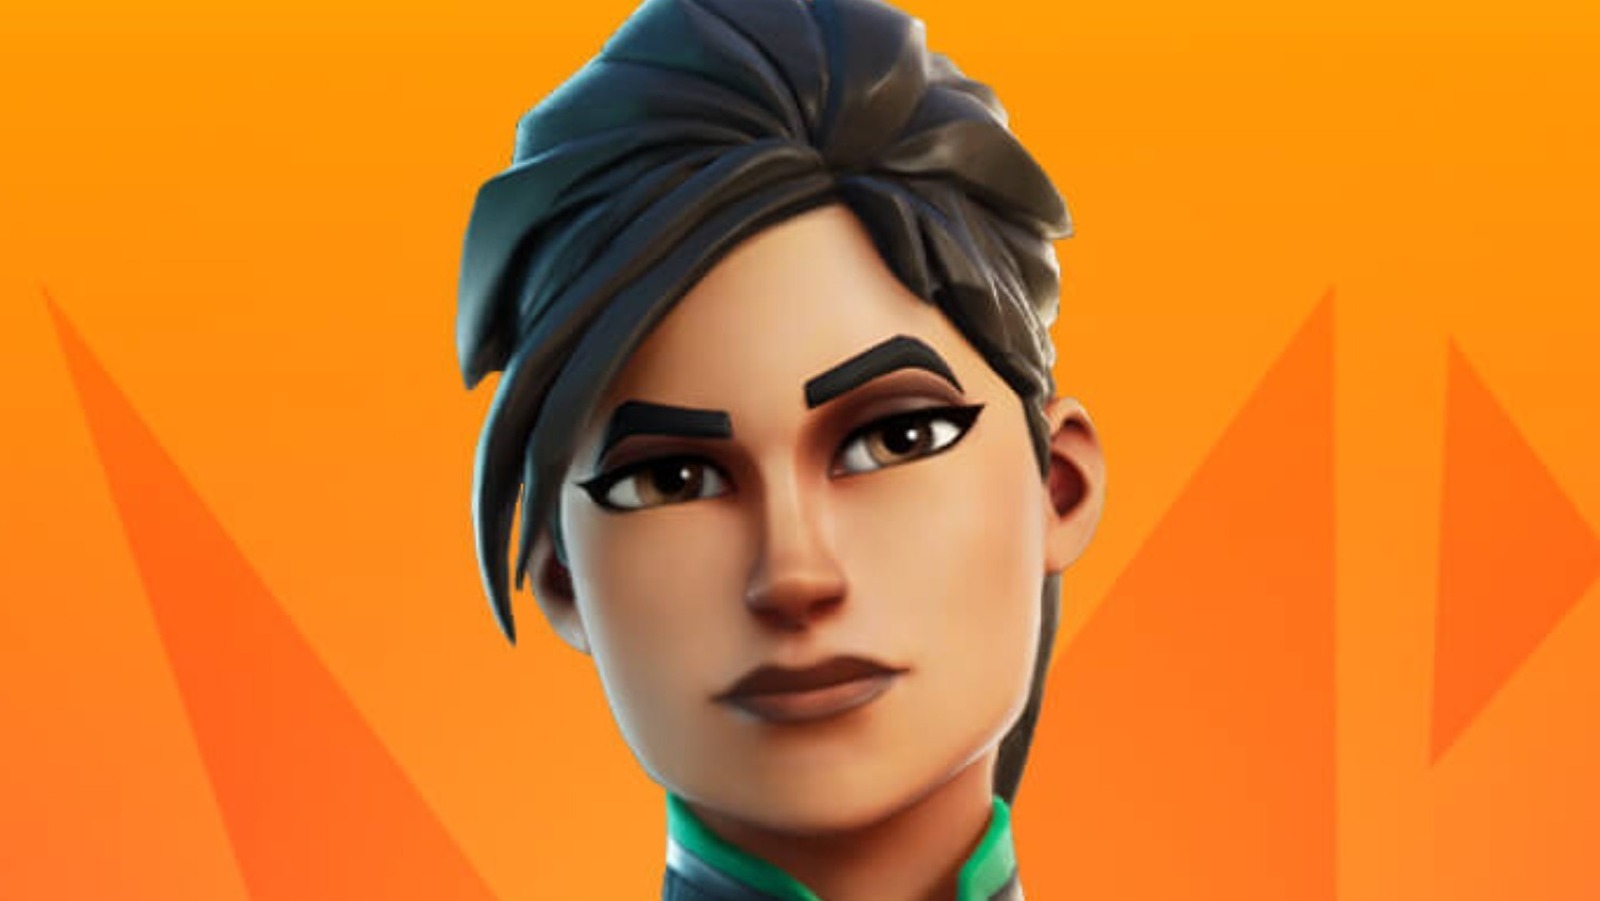 Reasons To Play As A Femal Skin In Fortnit The Real Reason Pros Use Female Character Skins In Fortnite